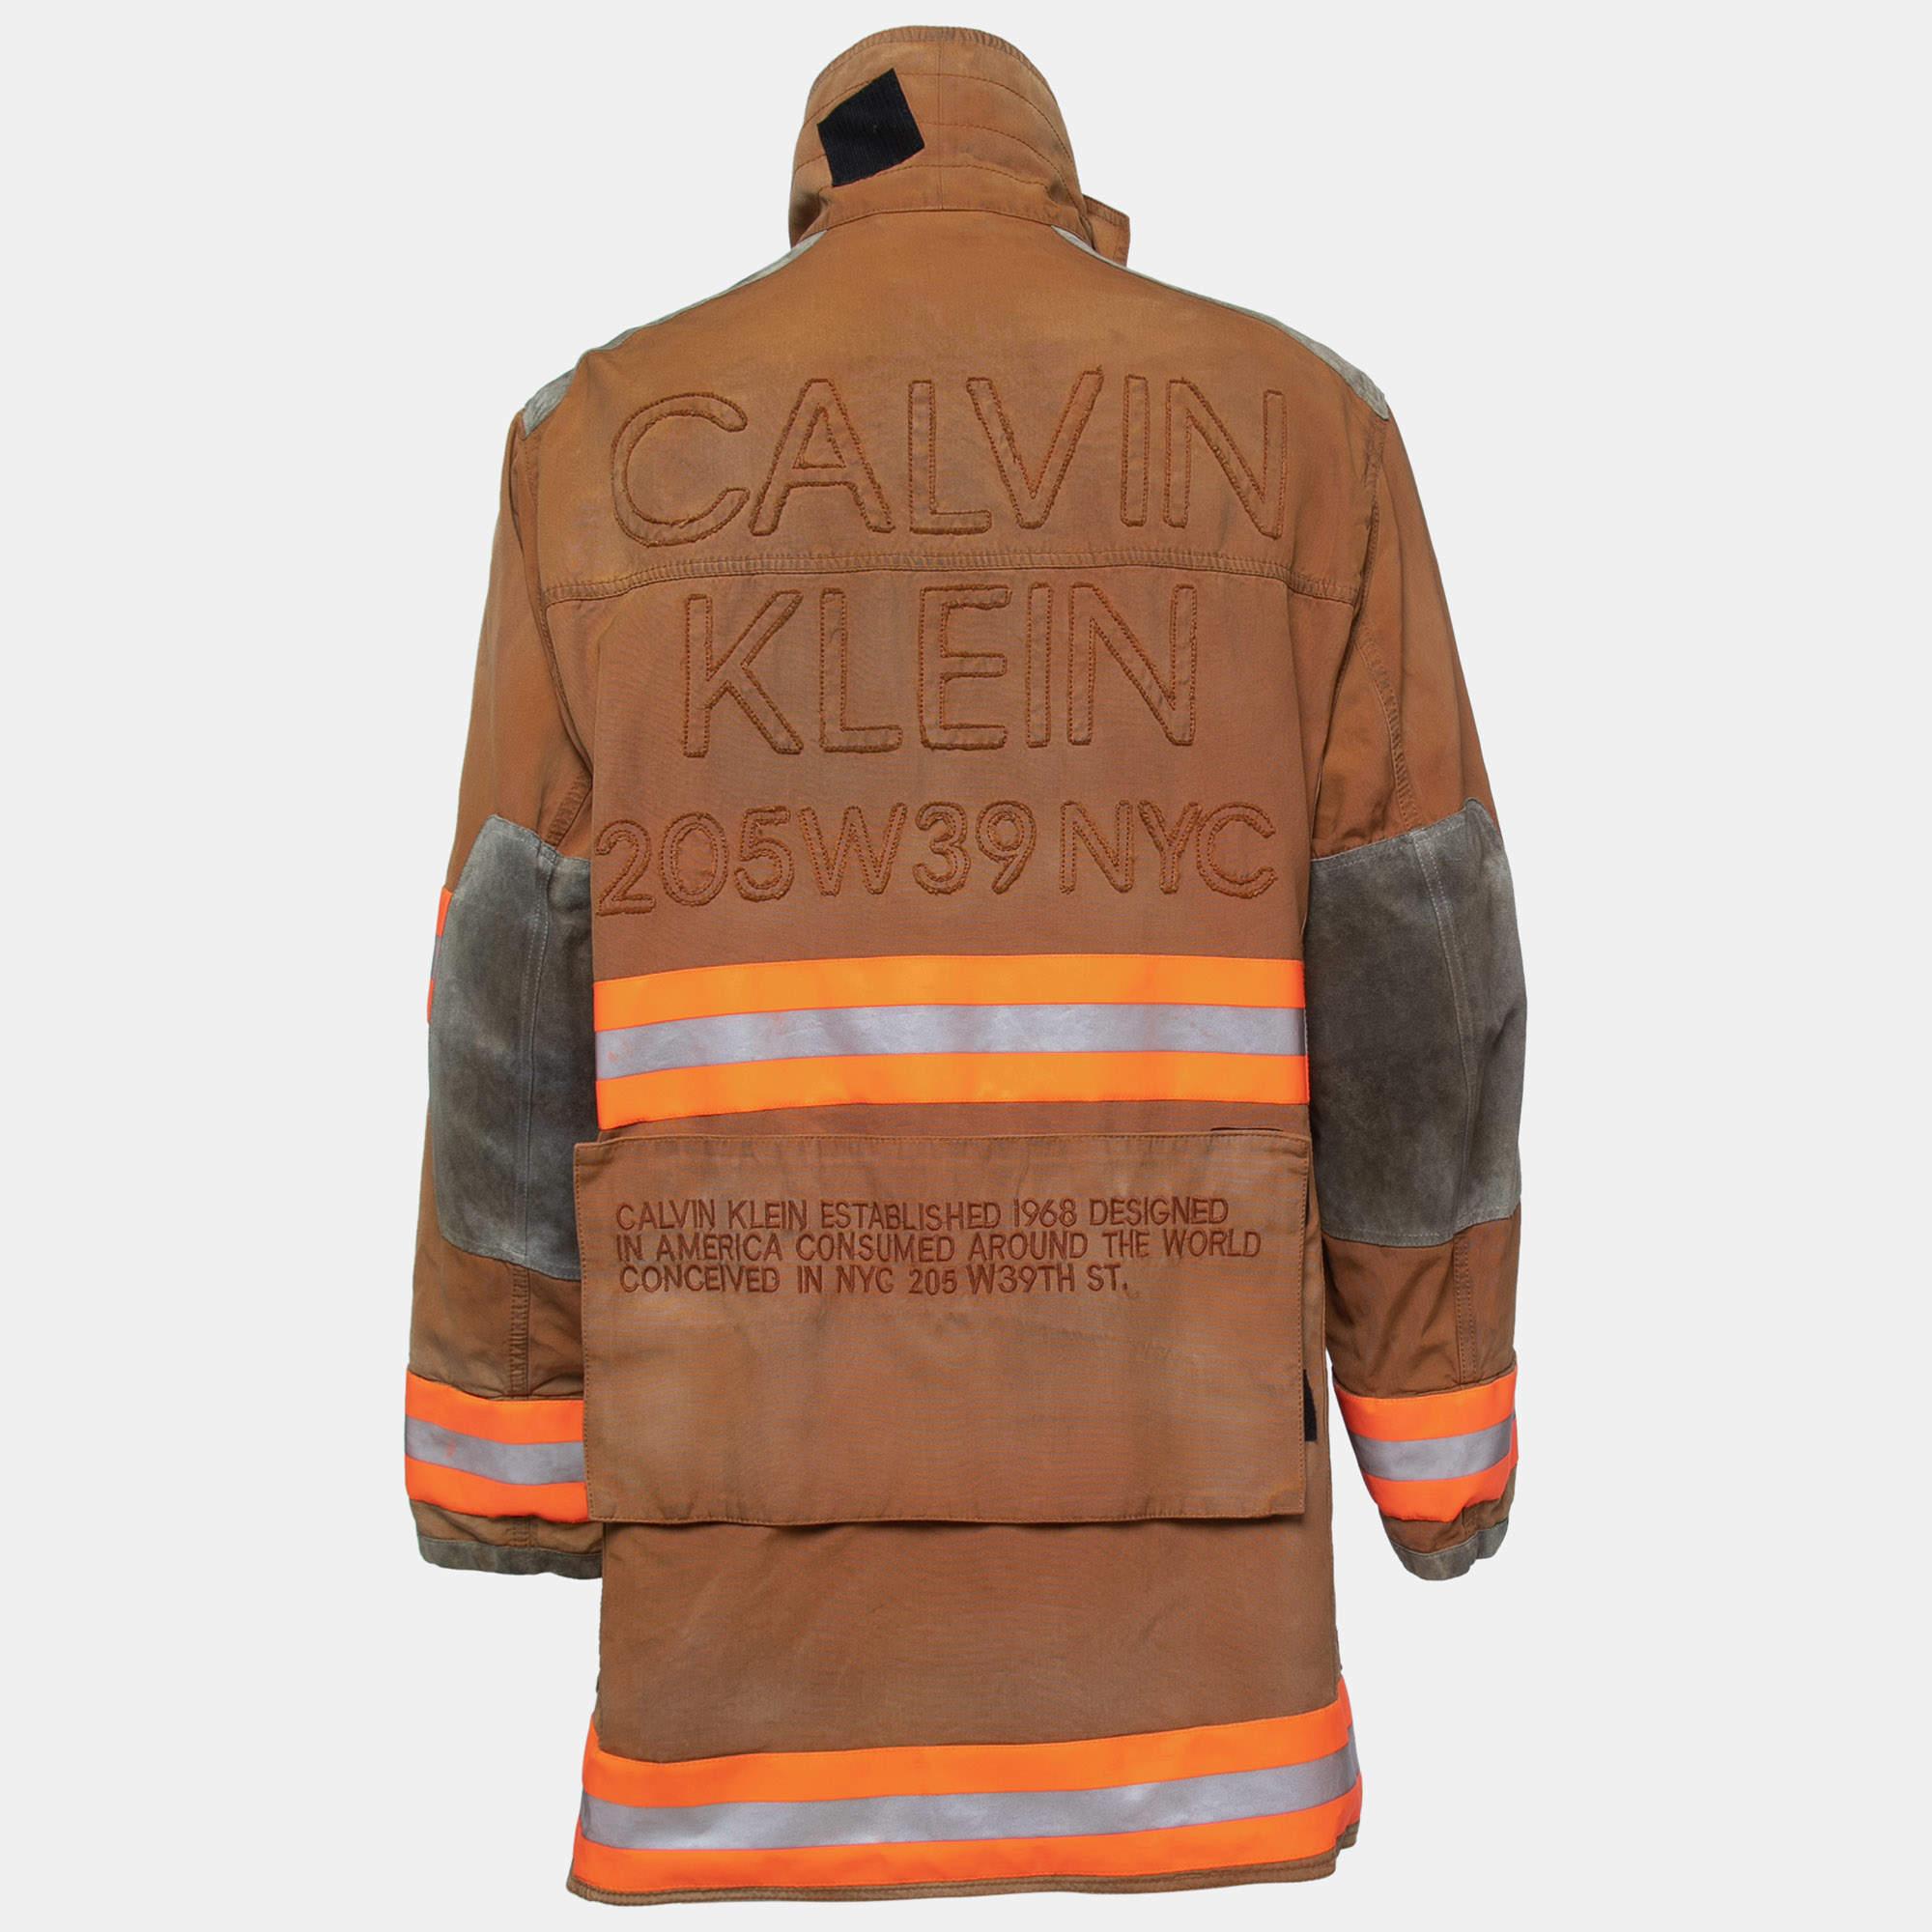 The Calvin Klein jacket is a rugged yet stylish outerwear piece. Crafted from distressed brown cotton, it features a fireman-style design with reflective accents for added safety. This jacket combines fashion with functionality, making it suitable